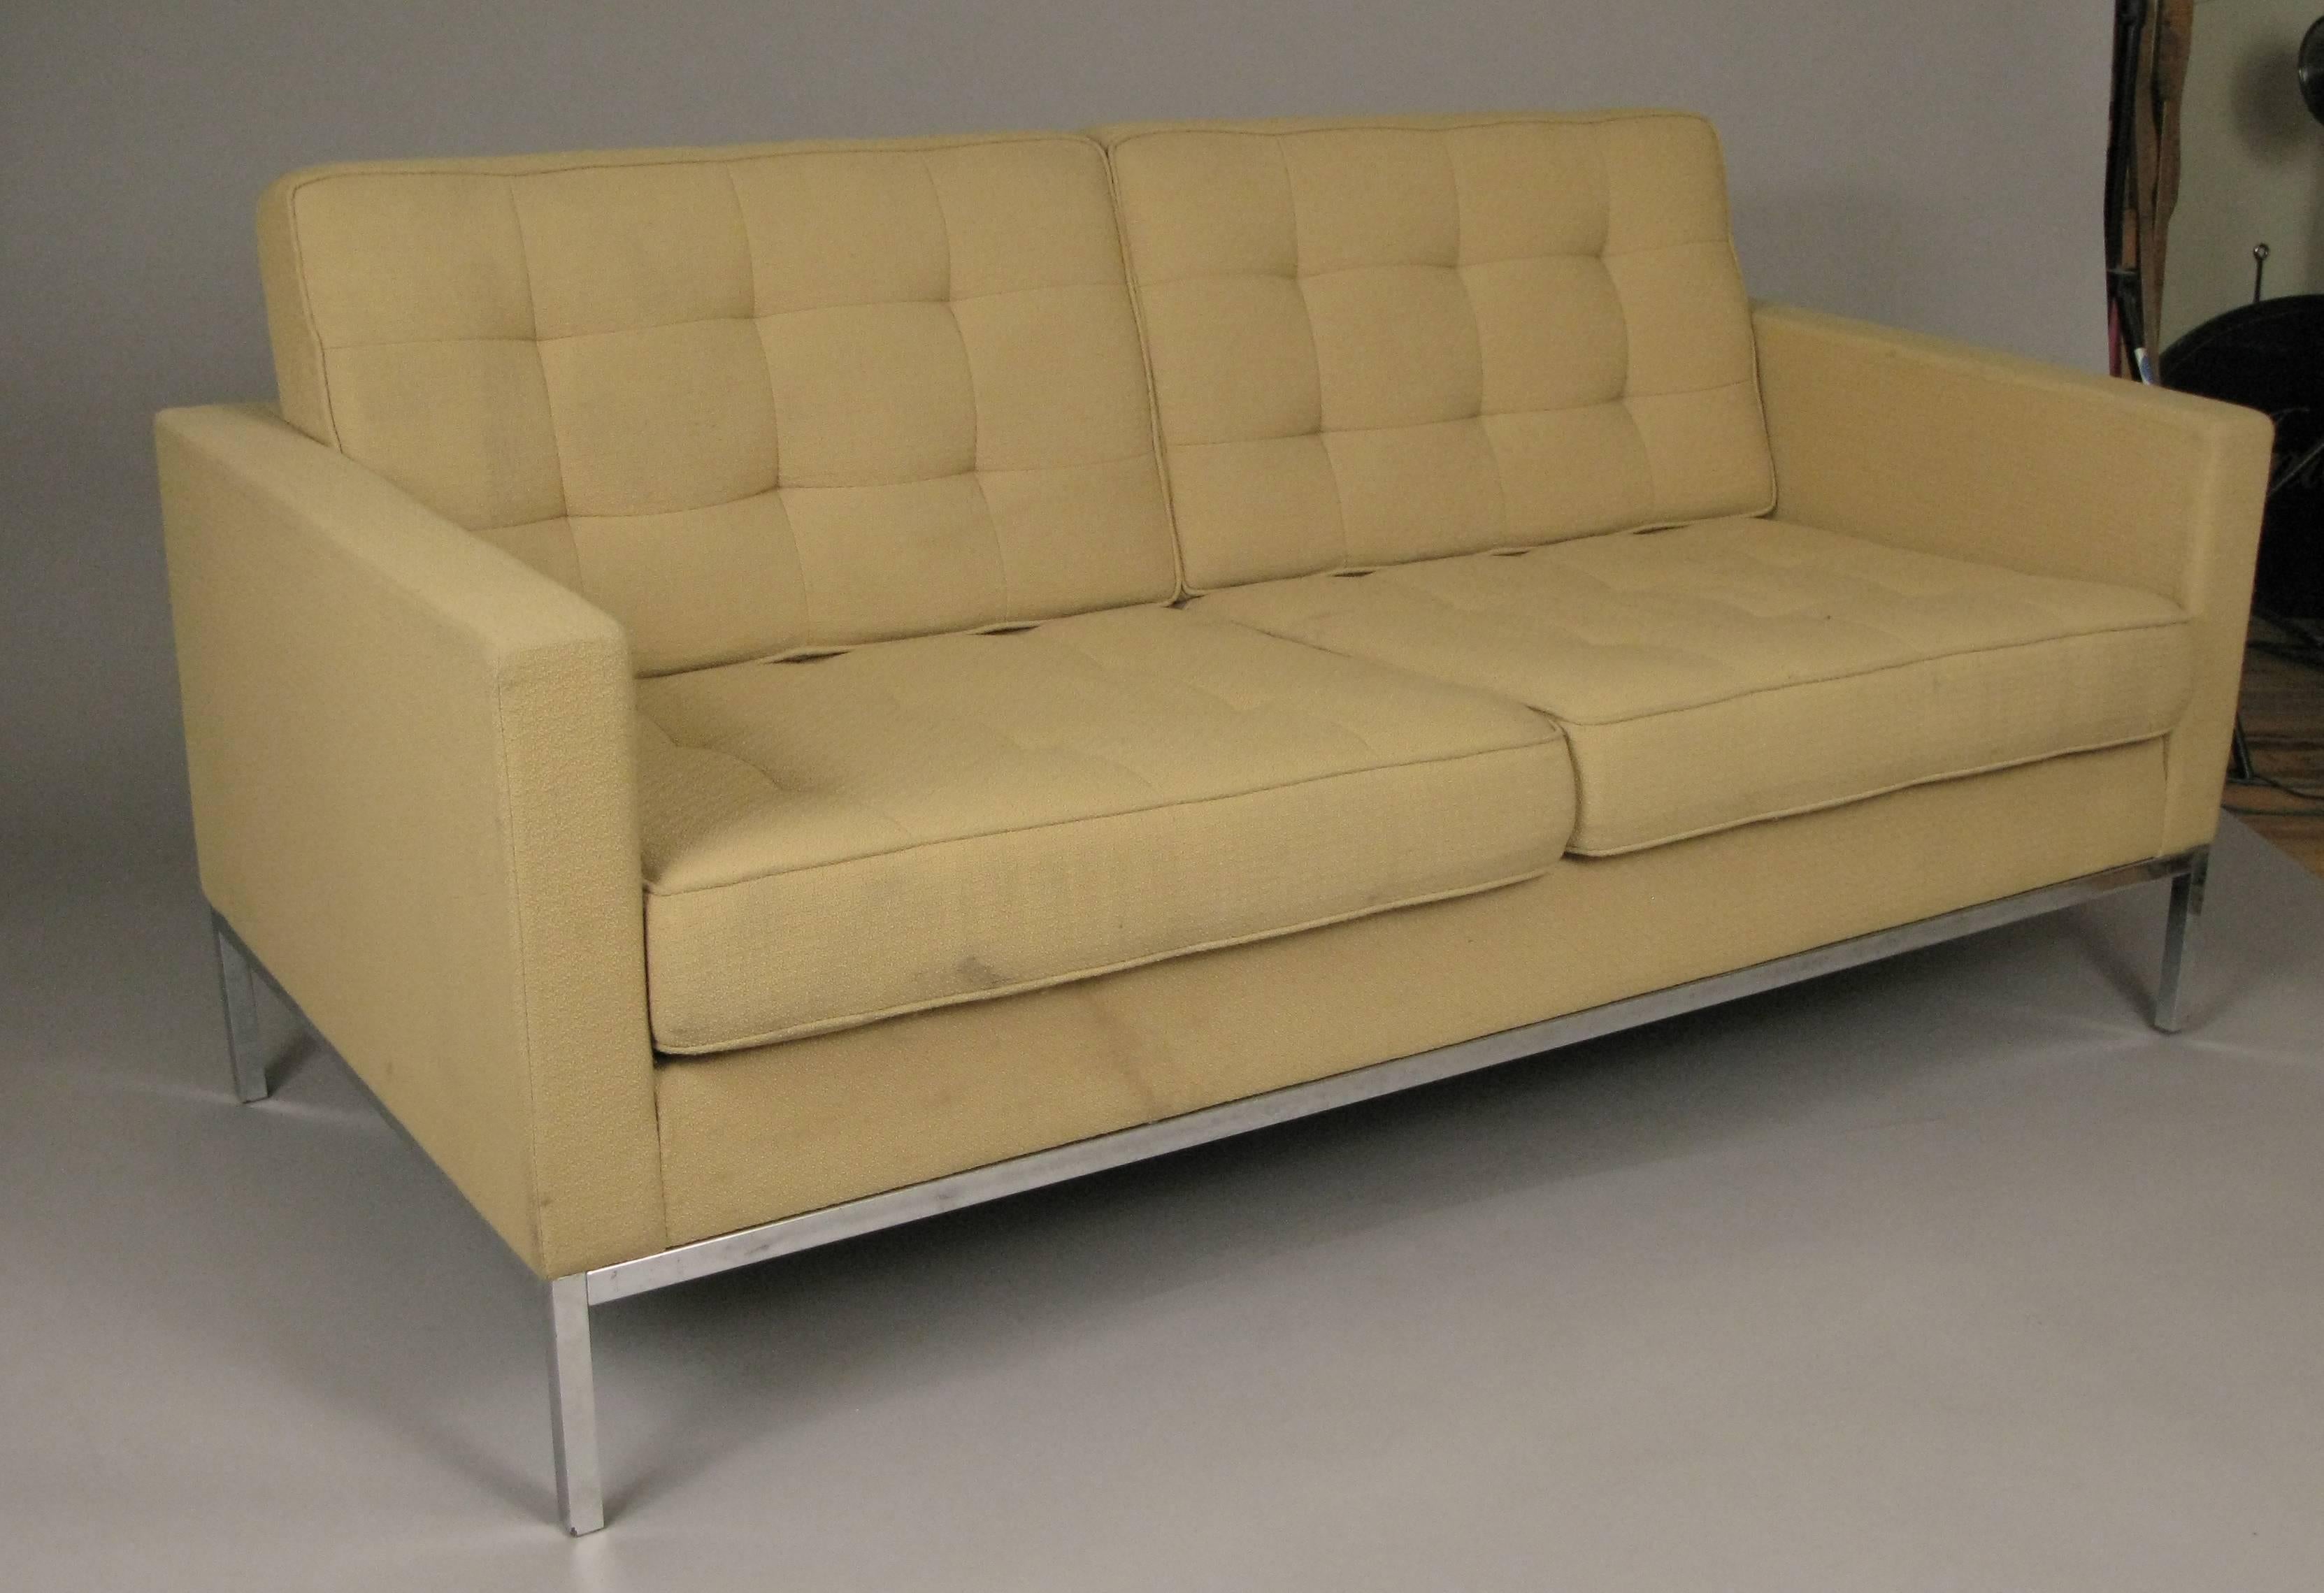 A Classic modern chrome base two-seat settee designed by Florence Knoll for Knoll International, with box quilted upholstery, which is in original condition with light wear and some stains.